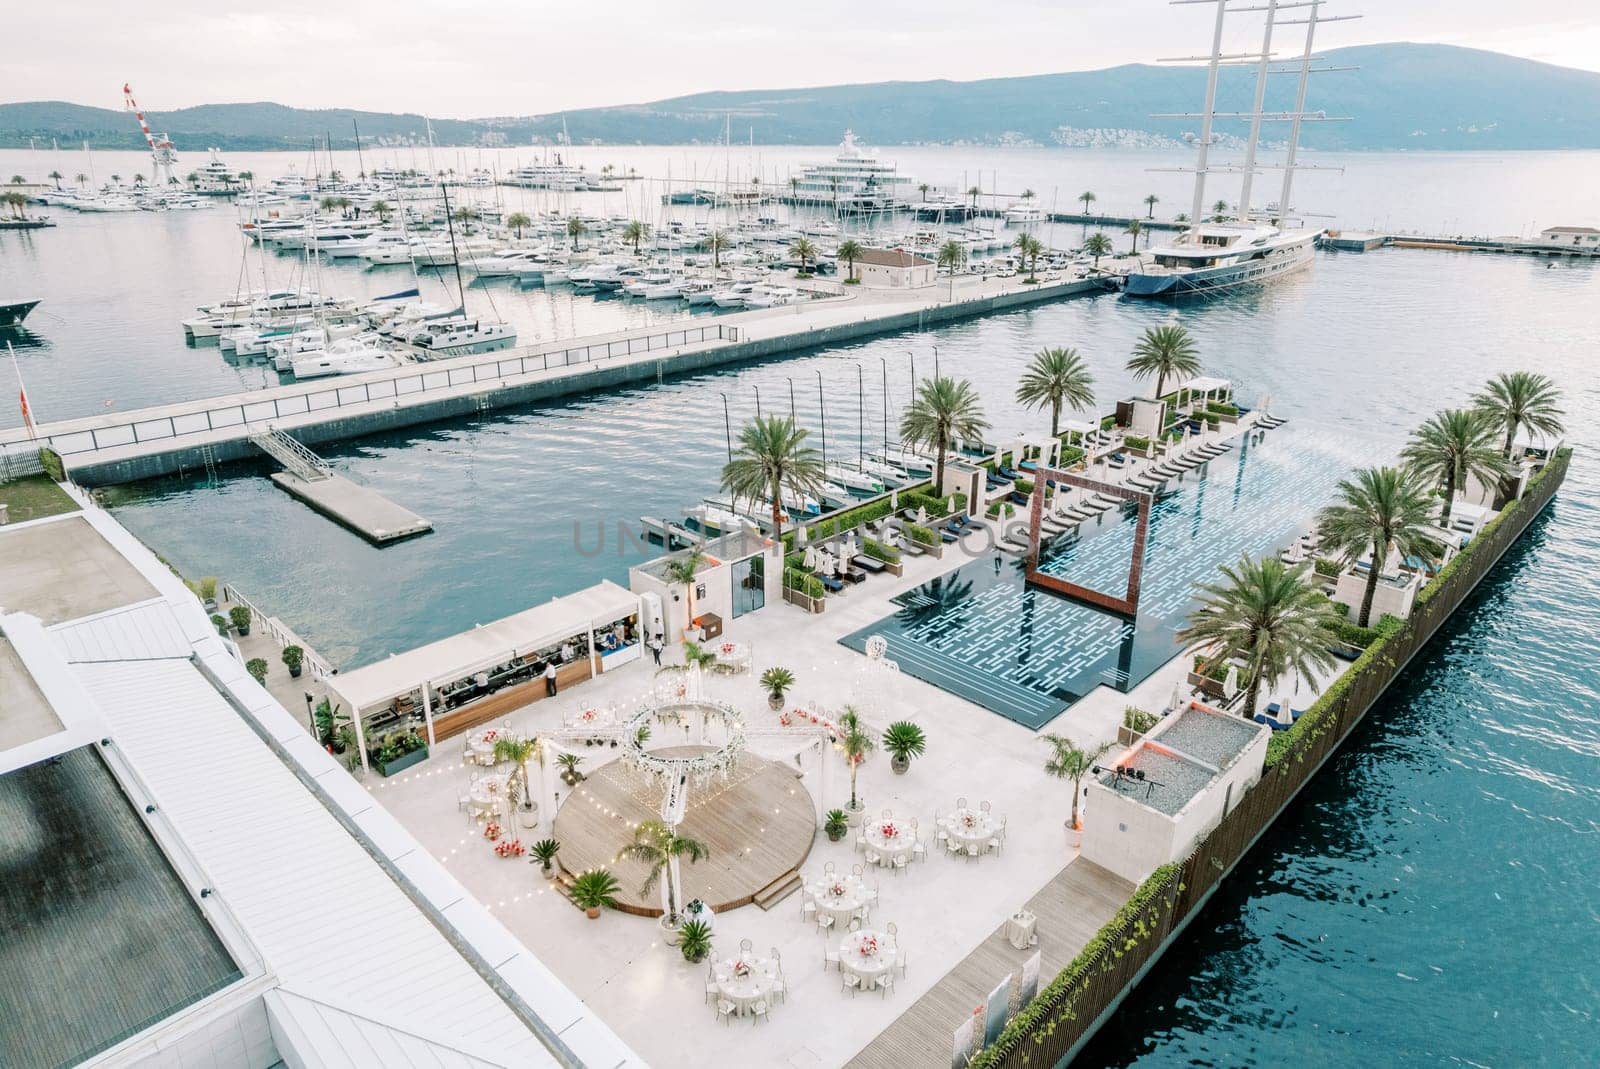 Round festive tables stand around a stage by the long pool on the pier of a luxurious marina. High quality photo